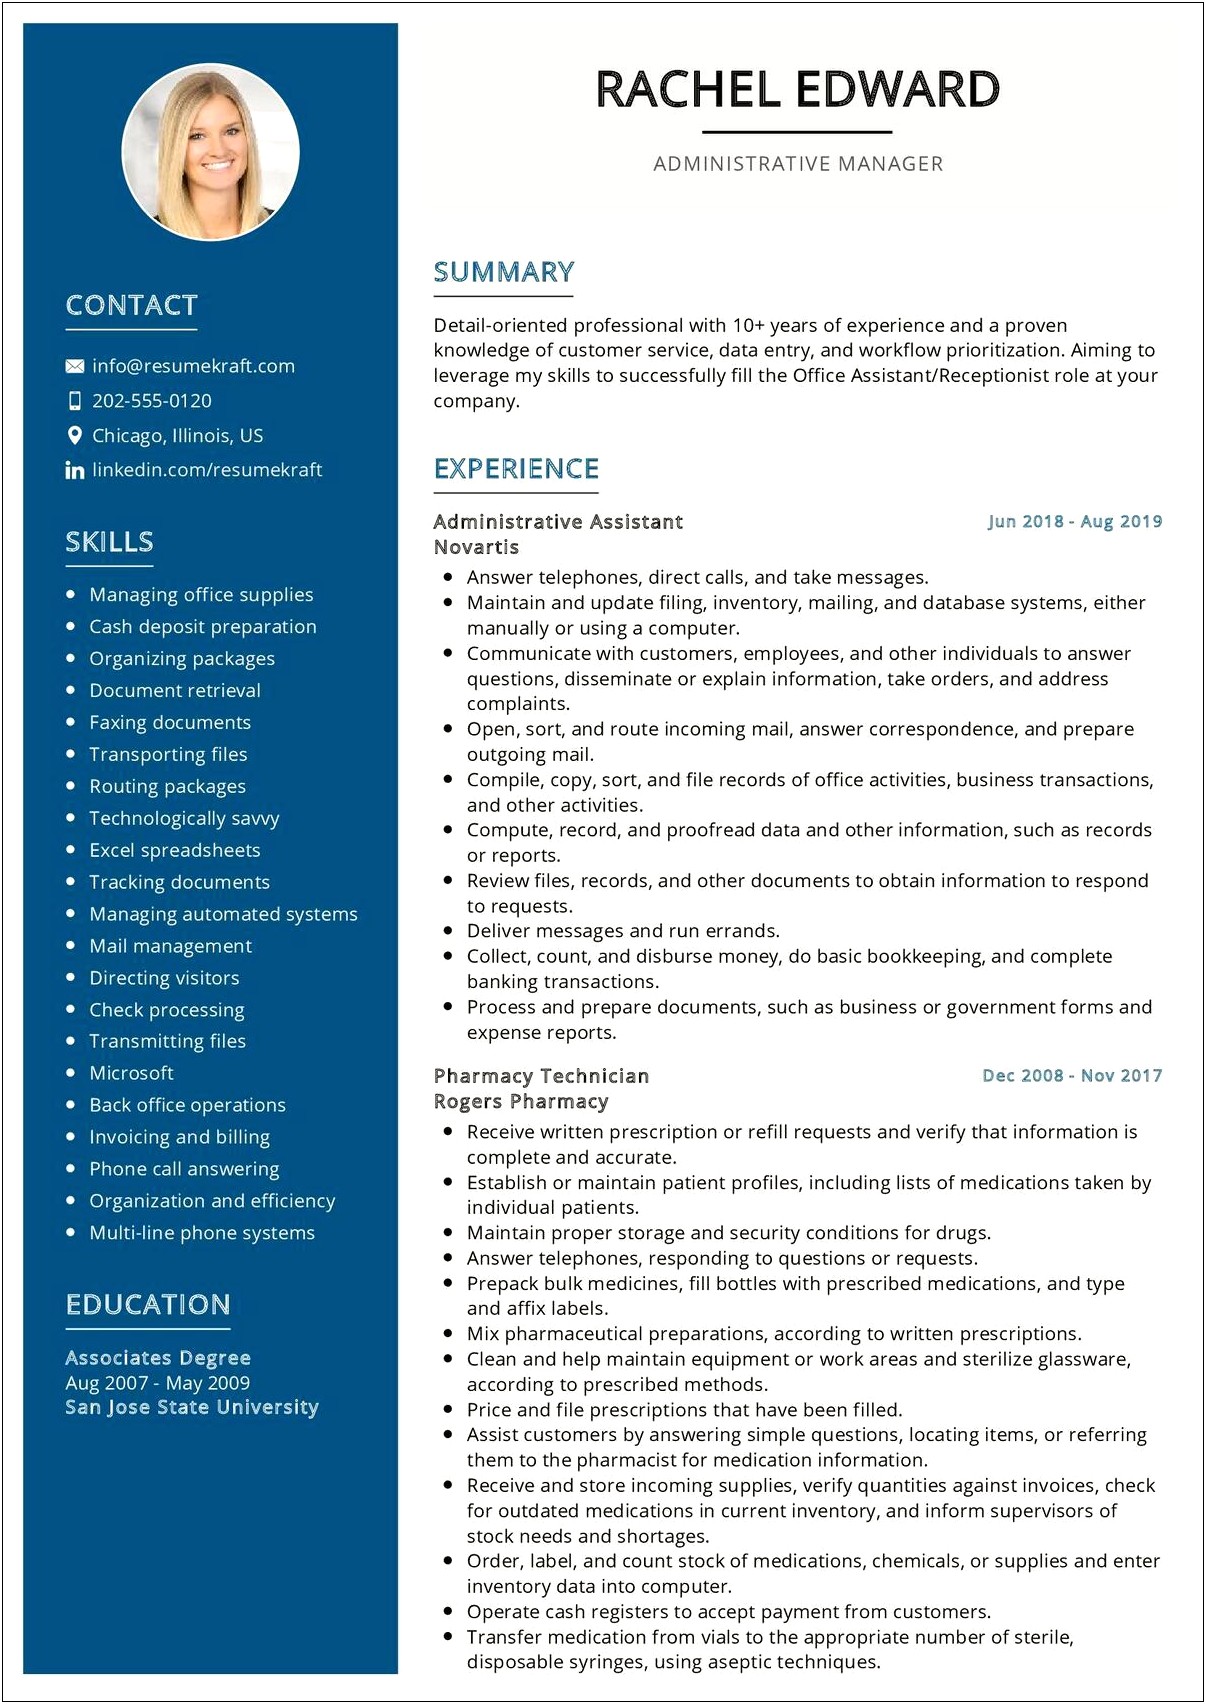 Skills For Administrative Manager Resume